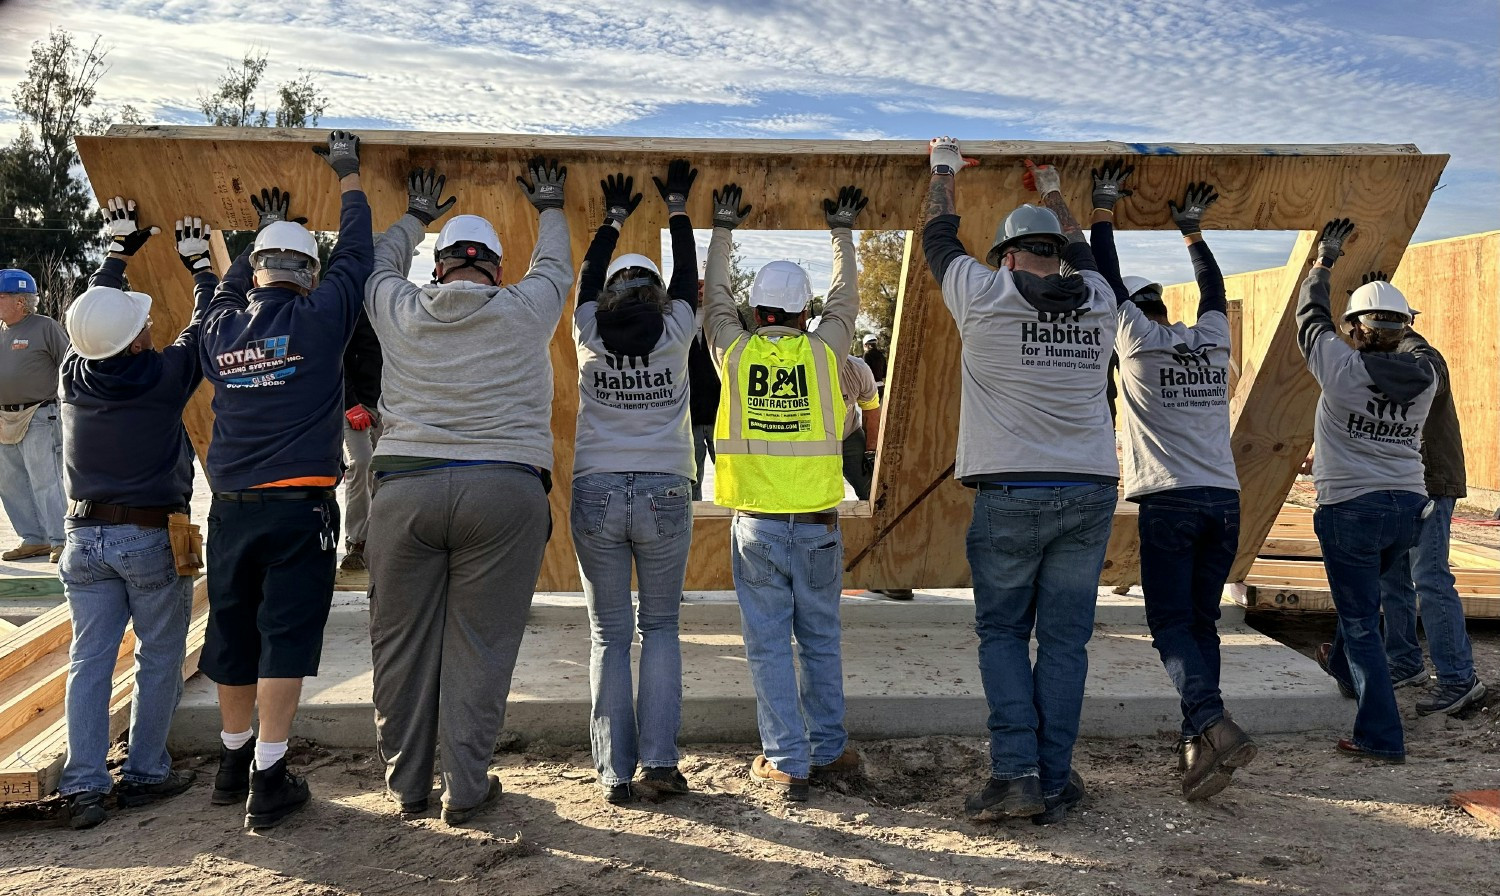 The B&I team members participate in the Wall Raising for Habitat for Humanity each year.